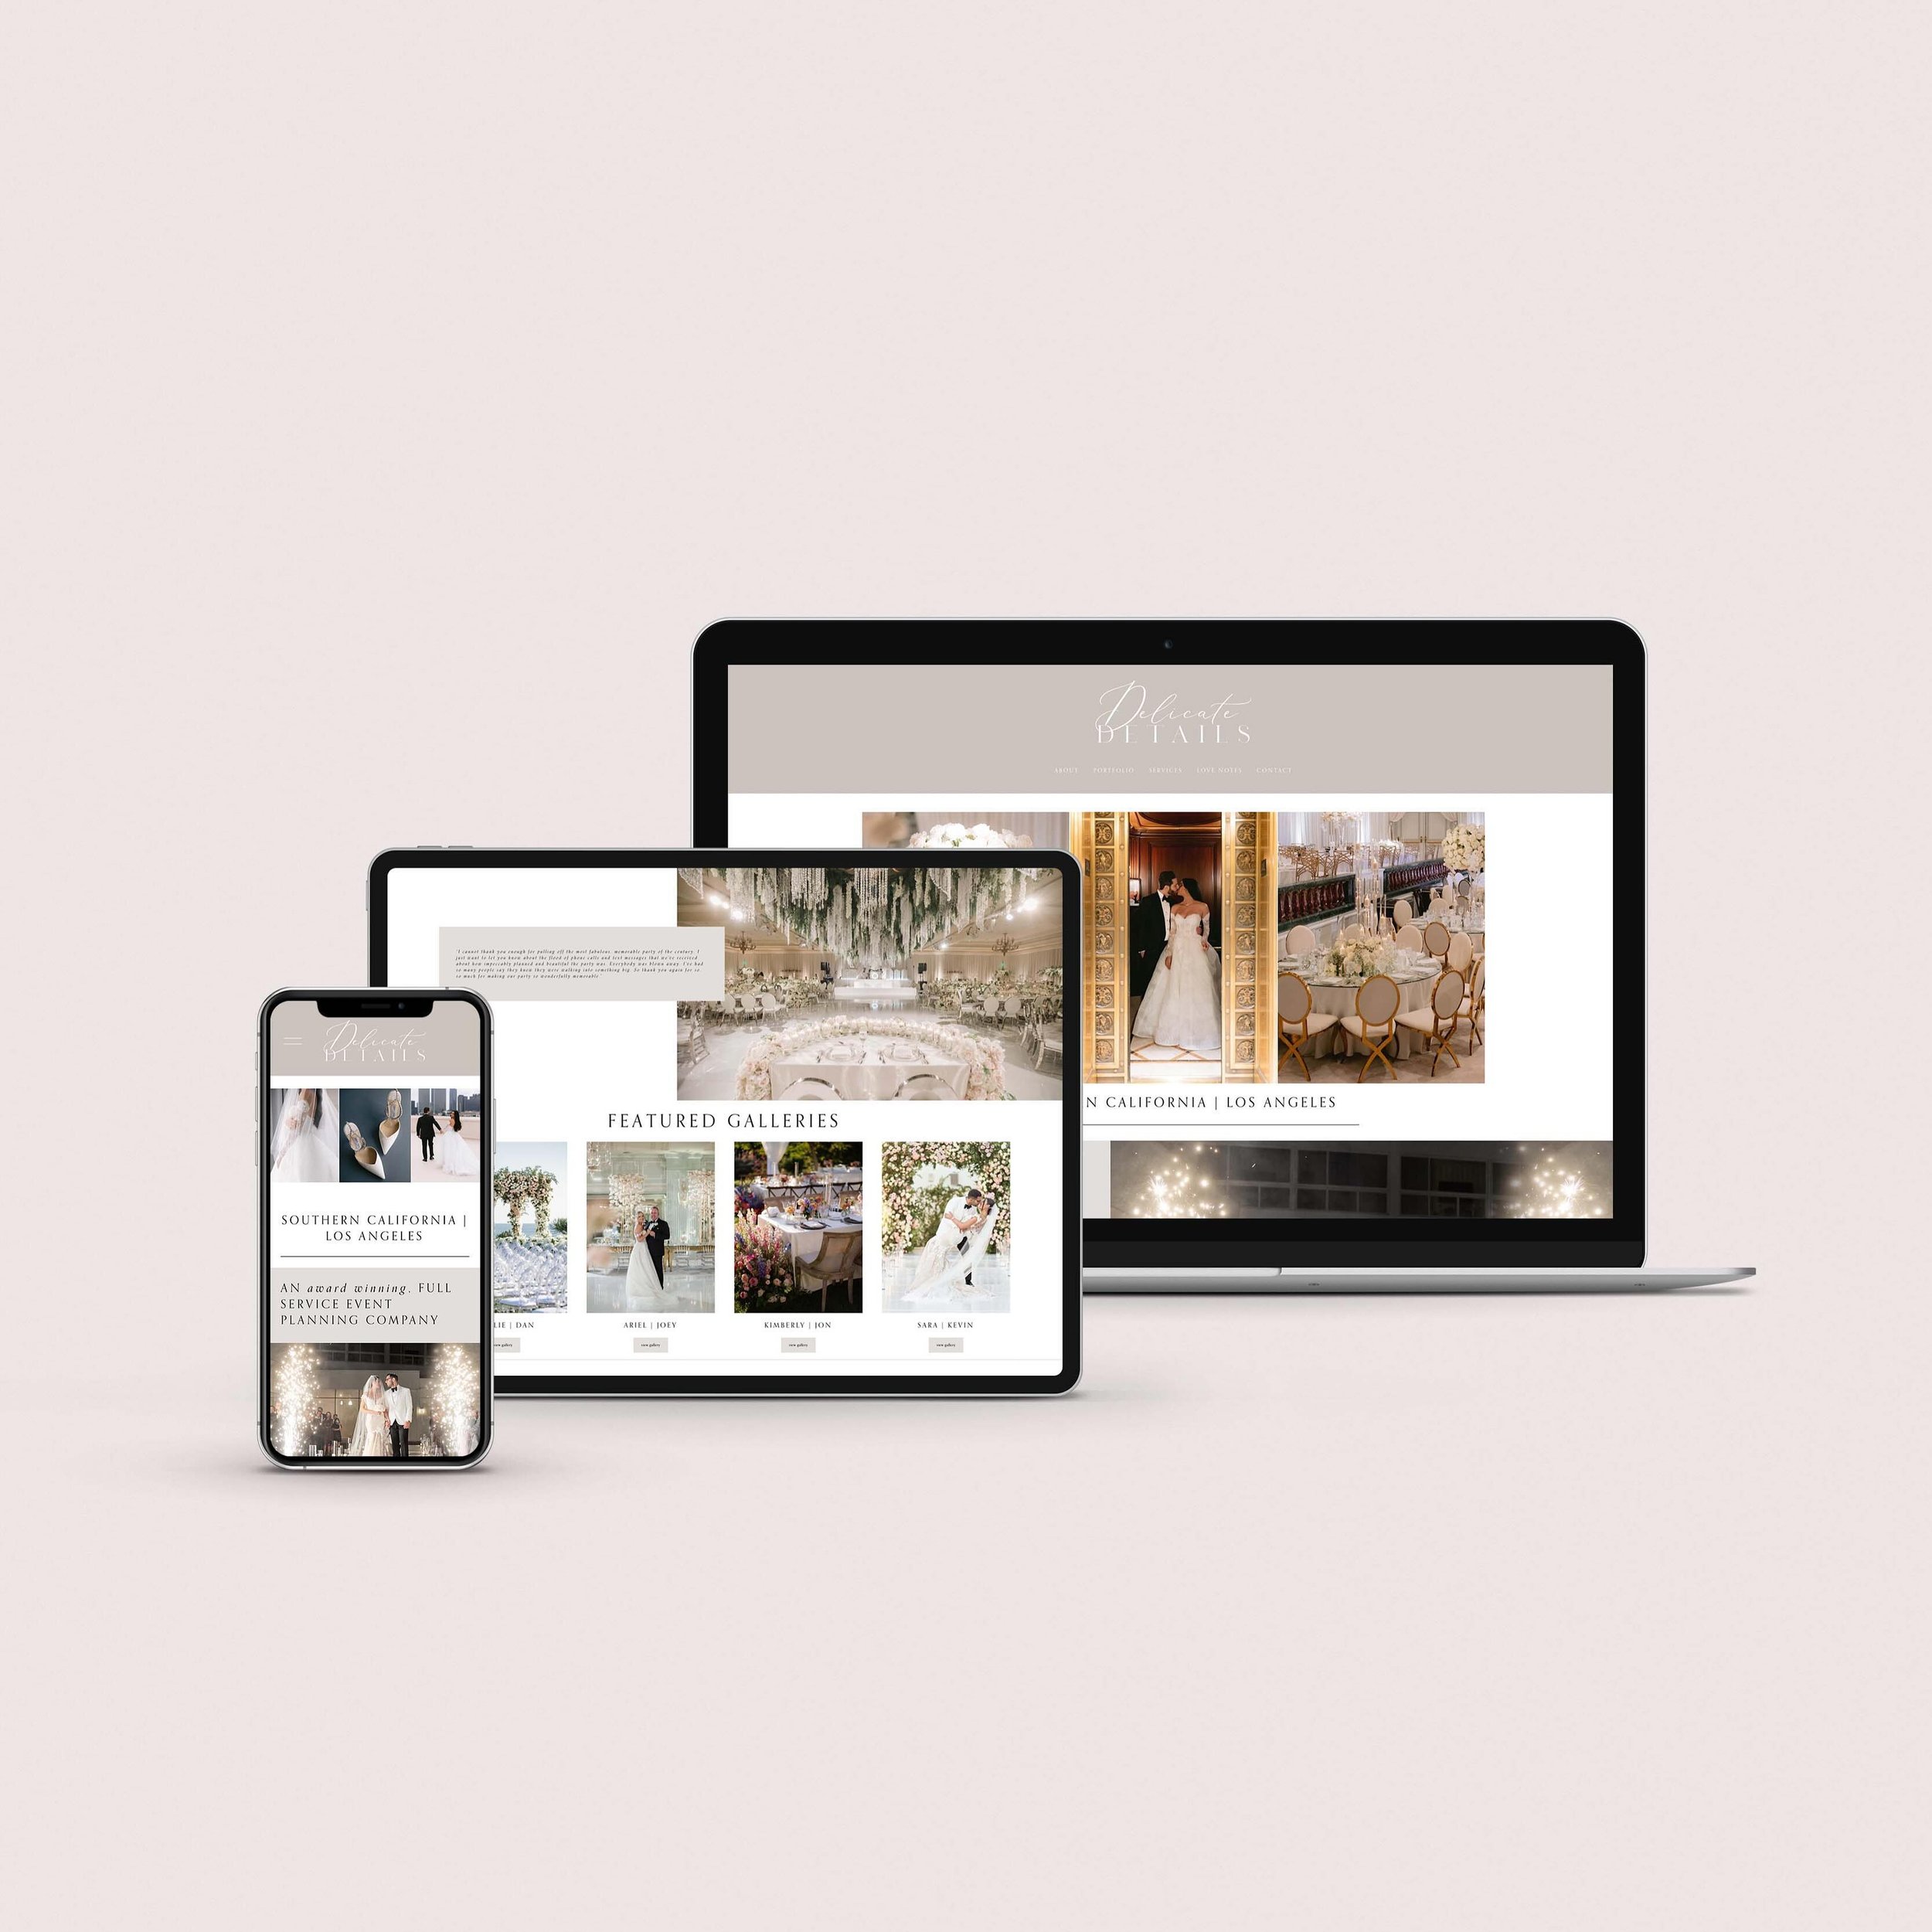 So excited for the launch of the website I designed for @delicatedetails &hellip; coming soon